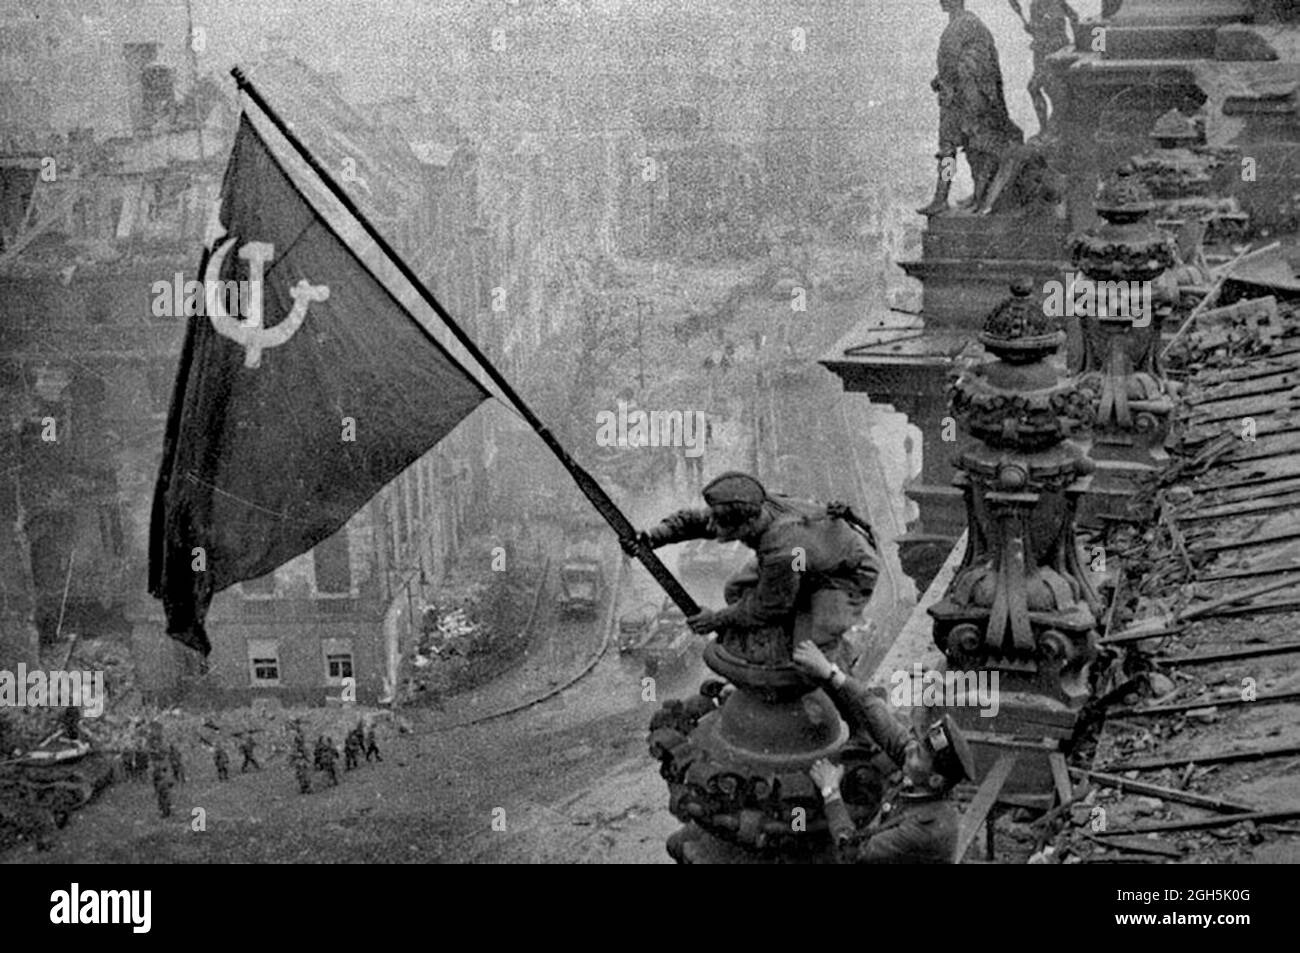 A soviet soldier raising the communist Red Flag on the Reichstag in Berlin, April 1945. This is the undoctored photo - the men have a watch on each wrist. Later versions, censored by th Soviet government, had these stolen watches removed from the photo. Stock Photo